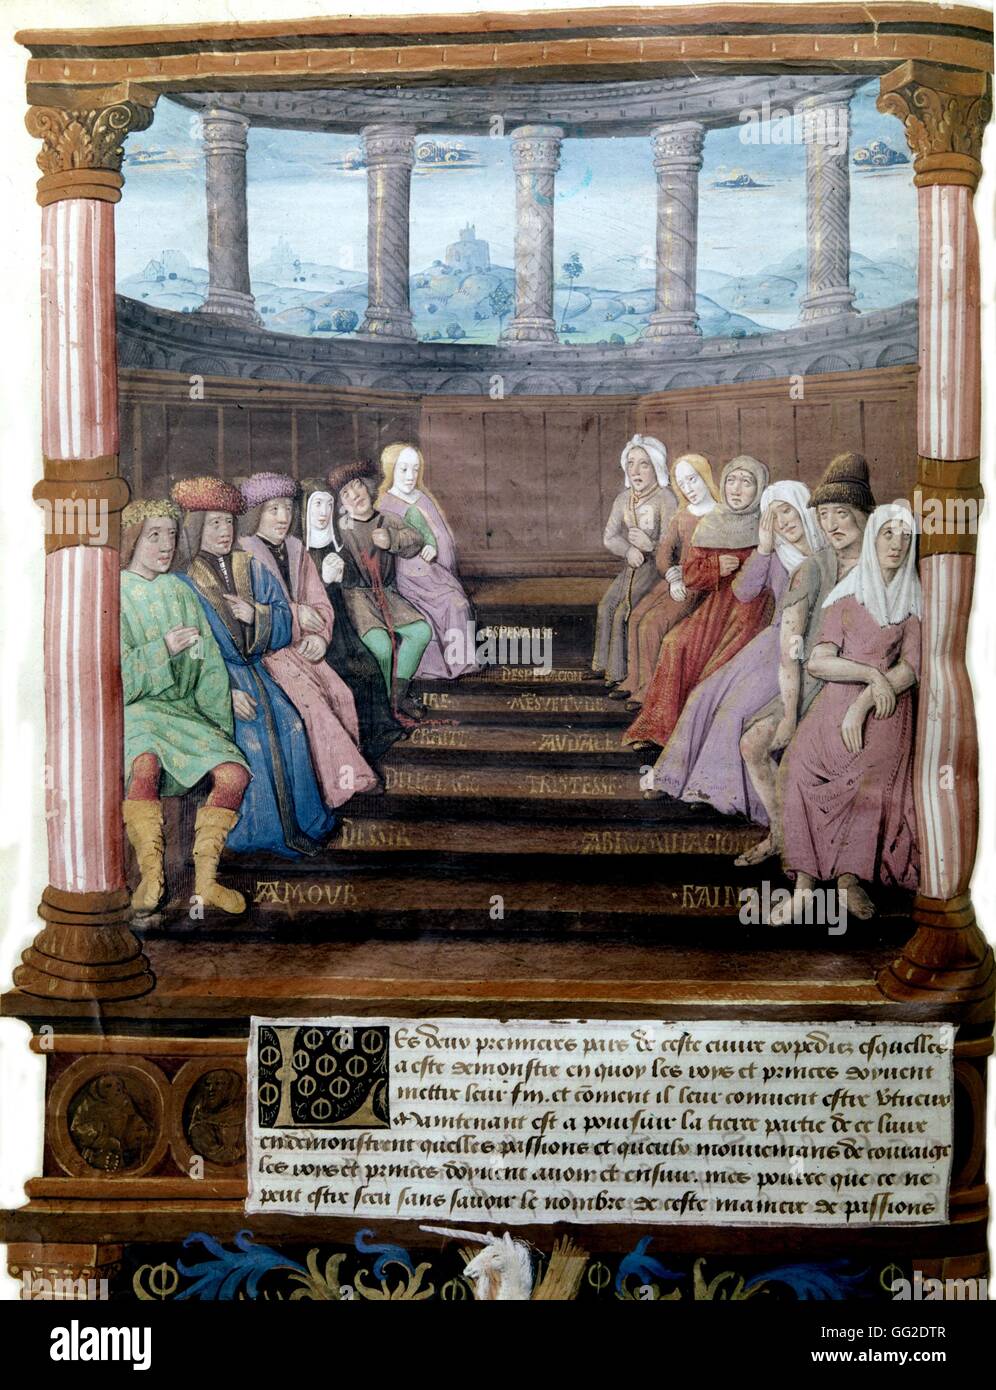 Gilles de Rome Book of the Government by Princes. Assembly of characters symbolizing Love, Hatred, Hope... c. 1510 France Paris. Bibliothèque de l'arsenal Stock Photo